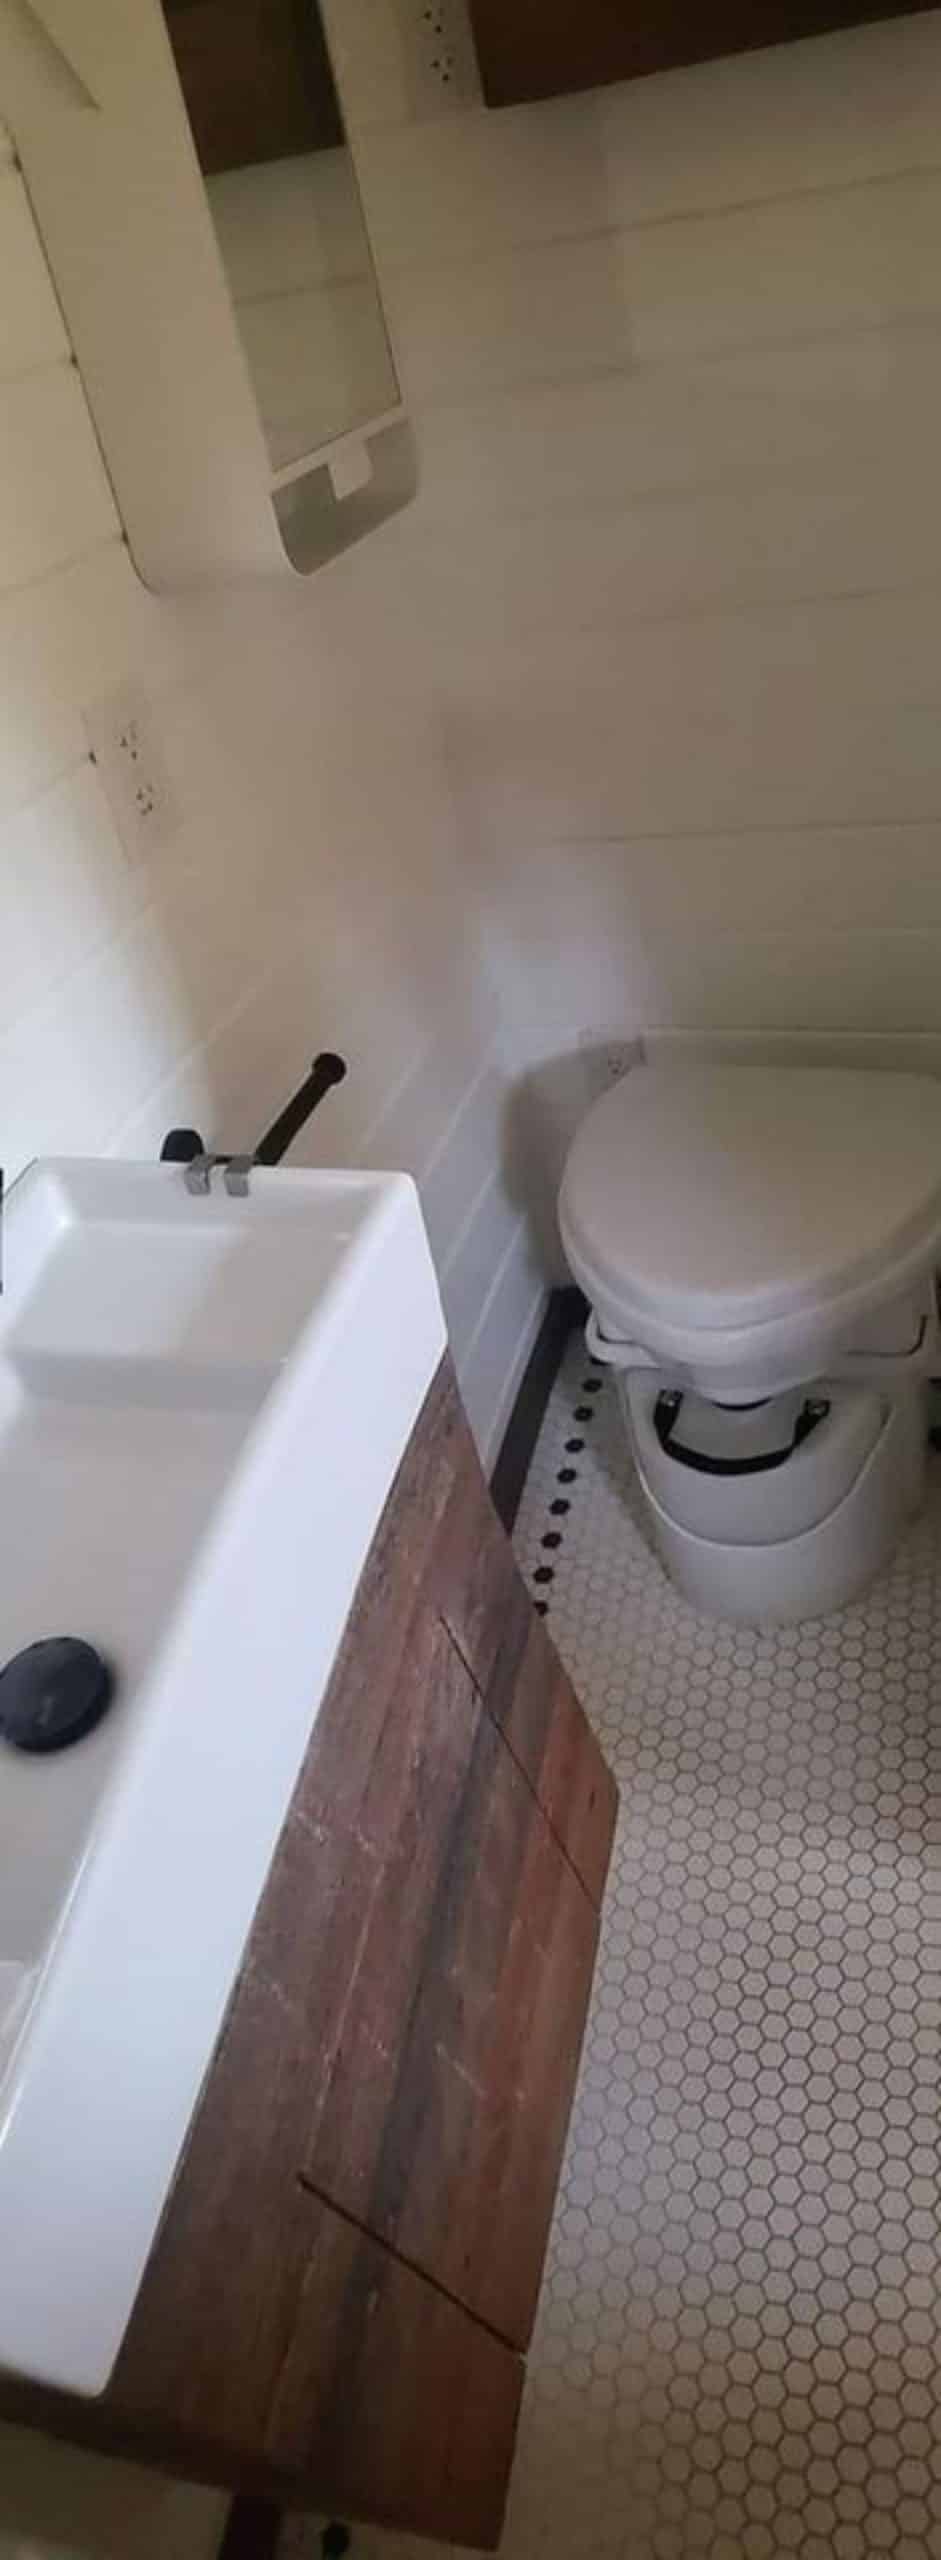 Composting toilet in bathroom of tiny house with two lofts